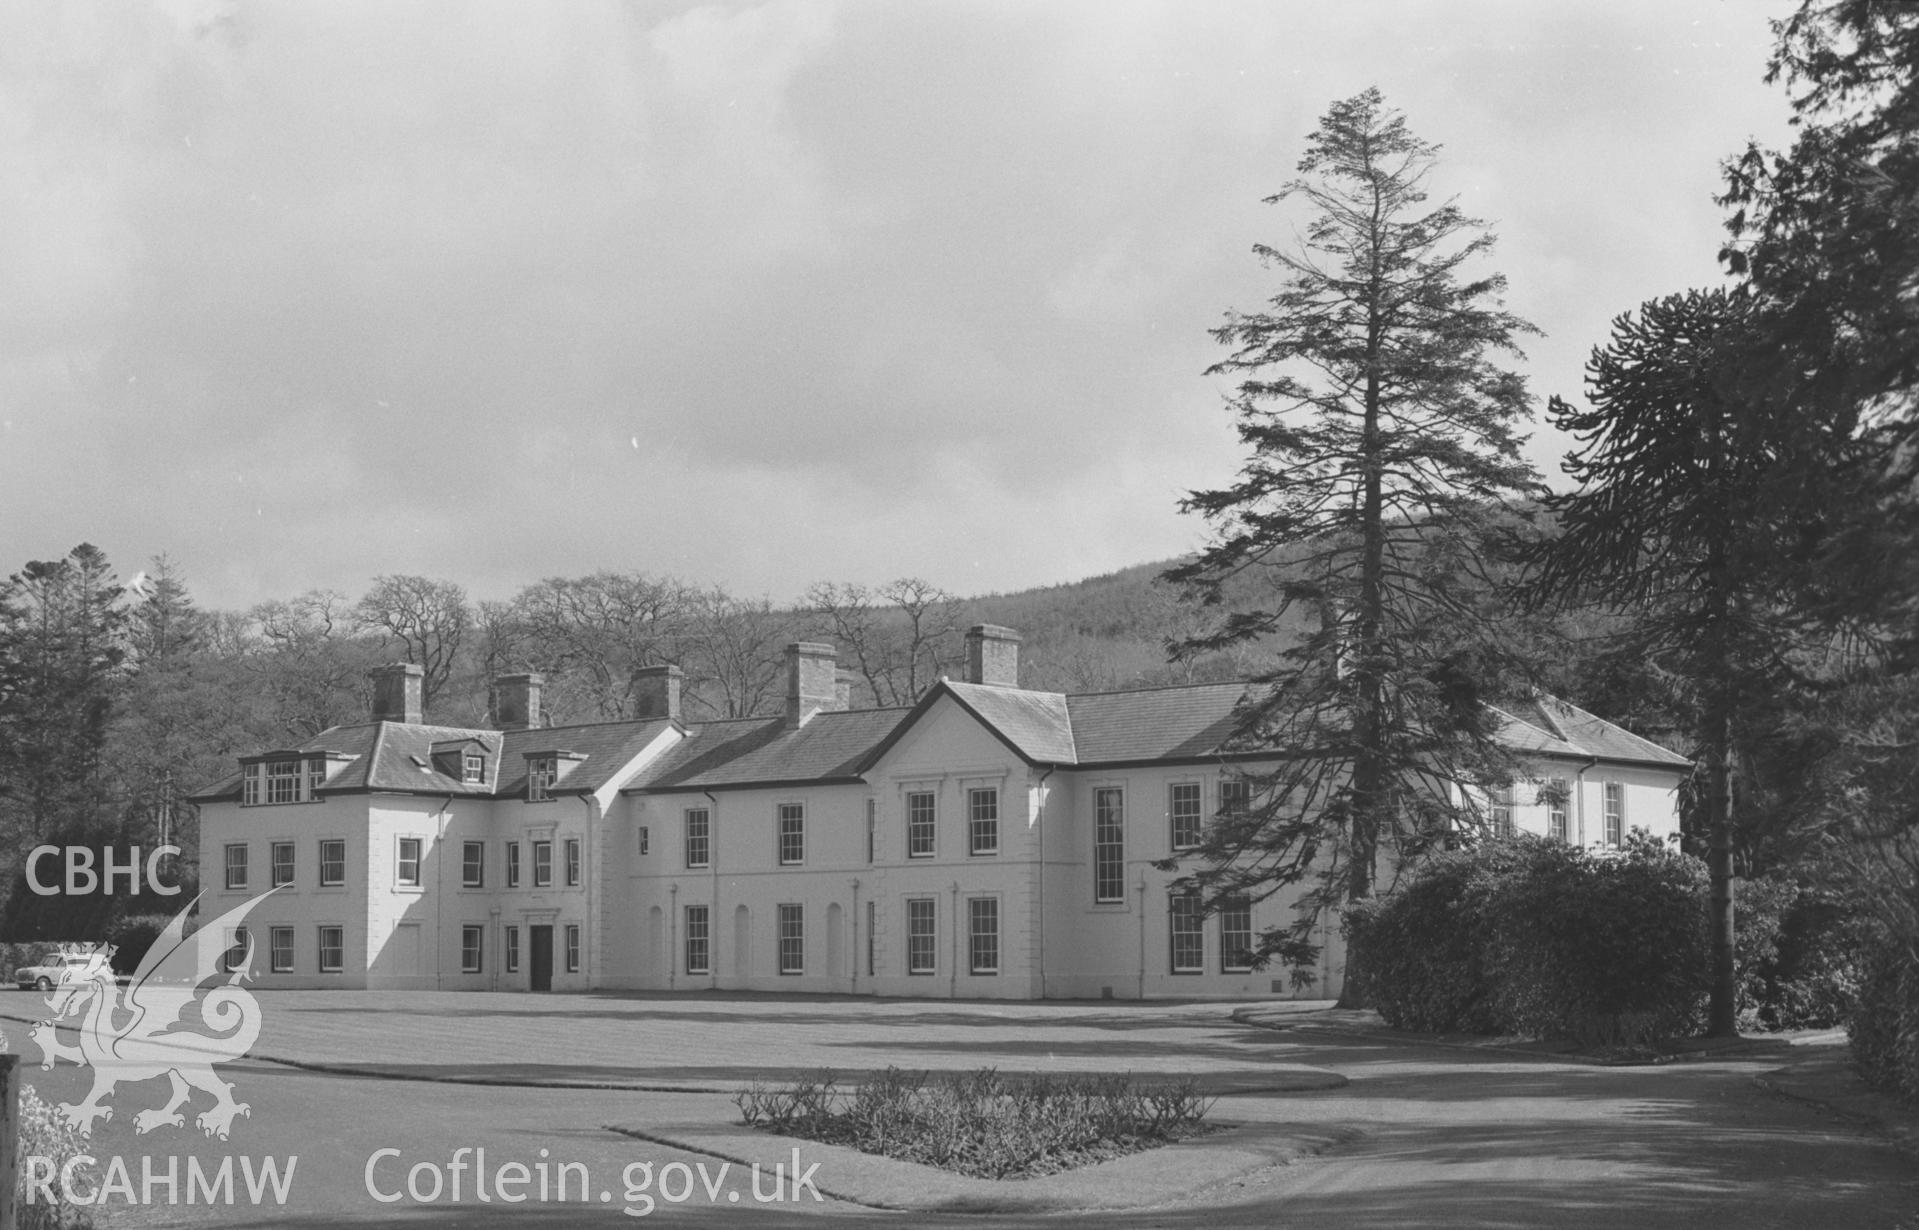 Digital copy of a black and white negative showing view of the front elevation of Plas Gogerddan. Photographed by Arthur O. Chater on 6th April 1968, looking south east from Grid Reference SN 628 836.